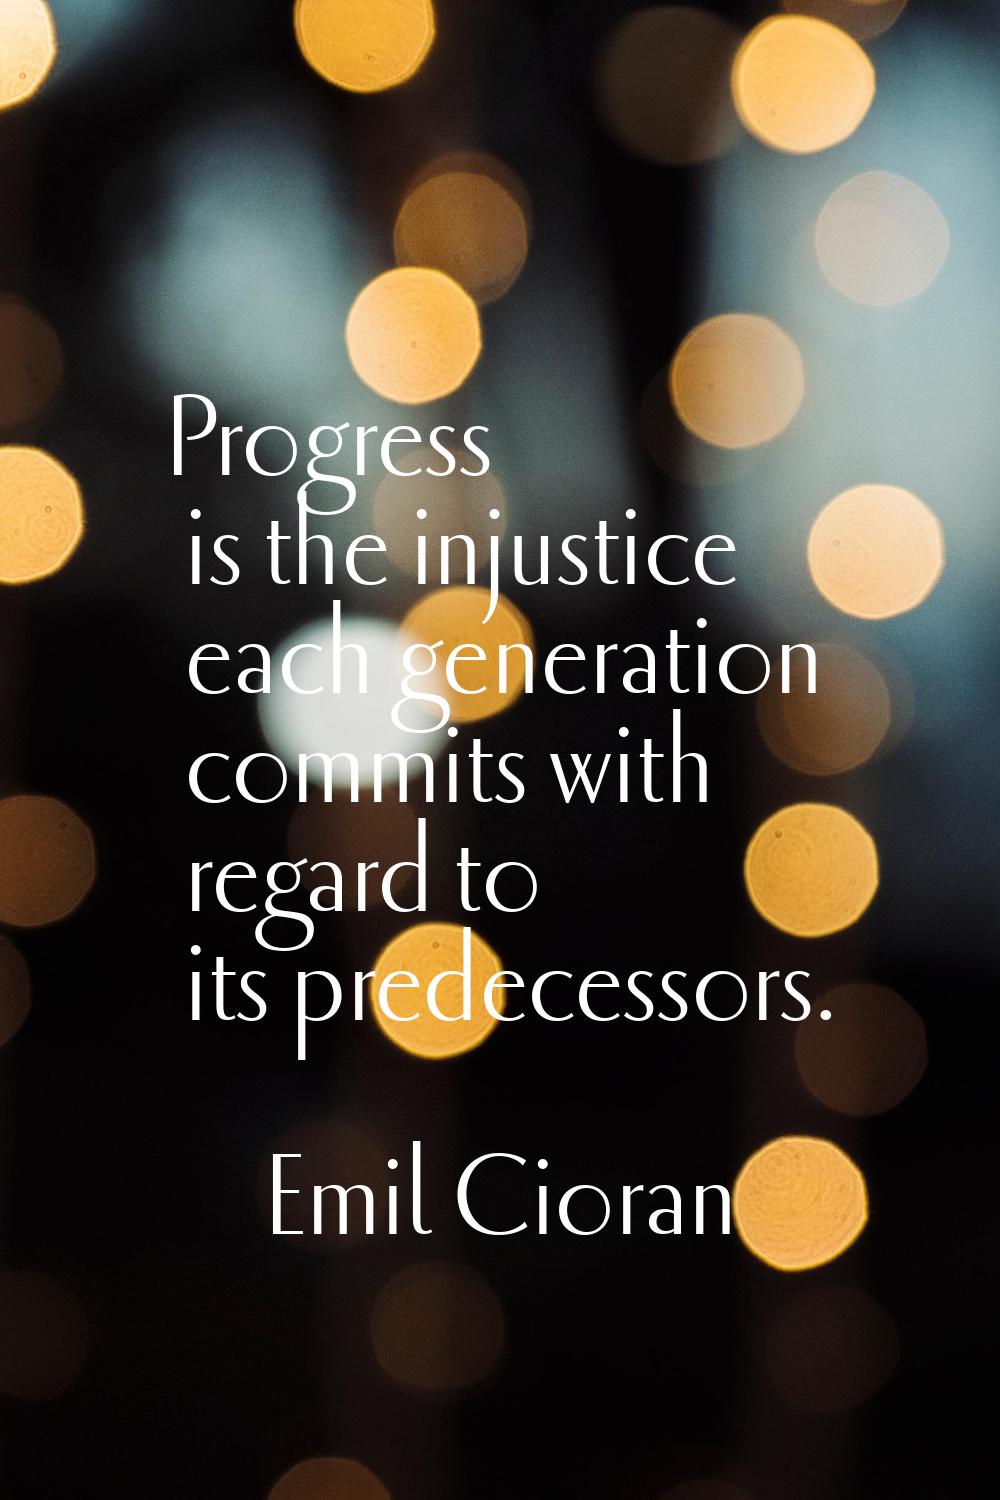 Progress is the injustice each generation commits with regard to its predecessors.